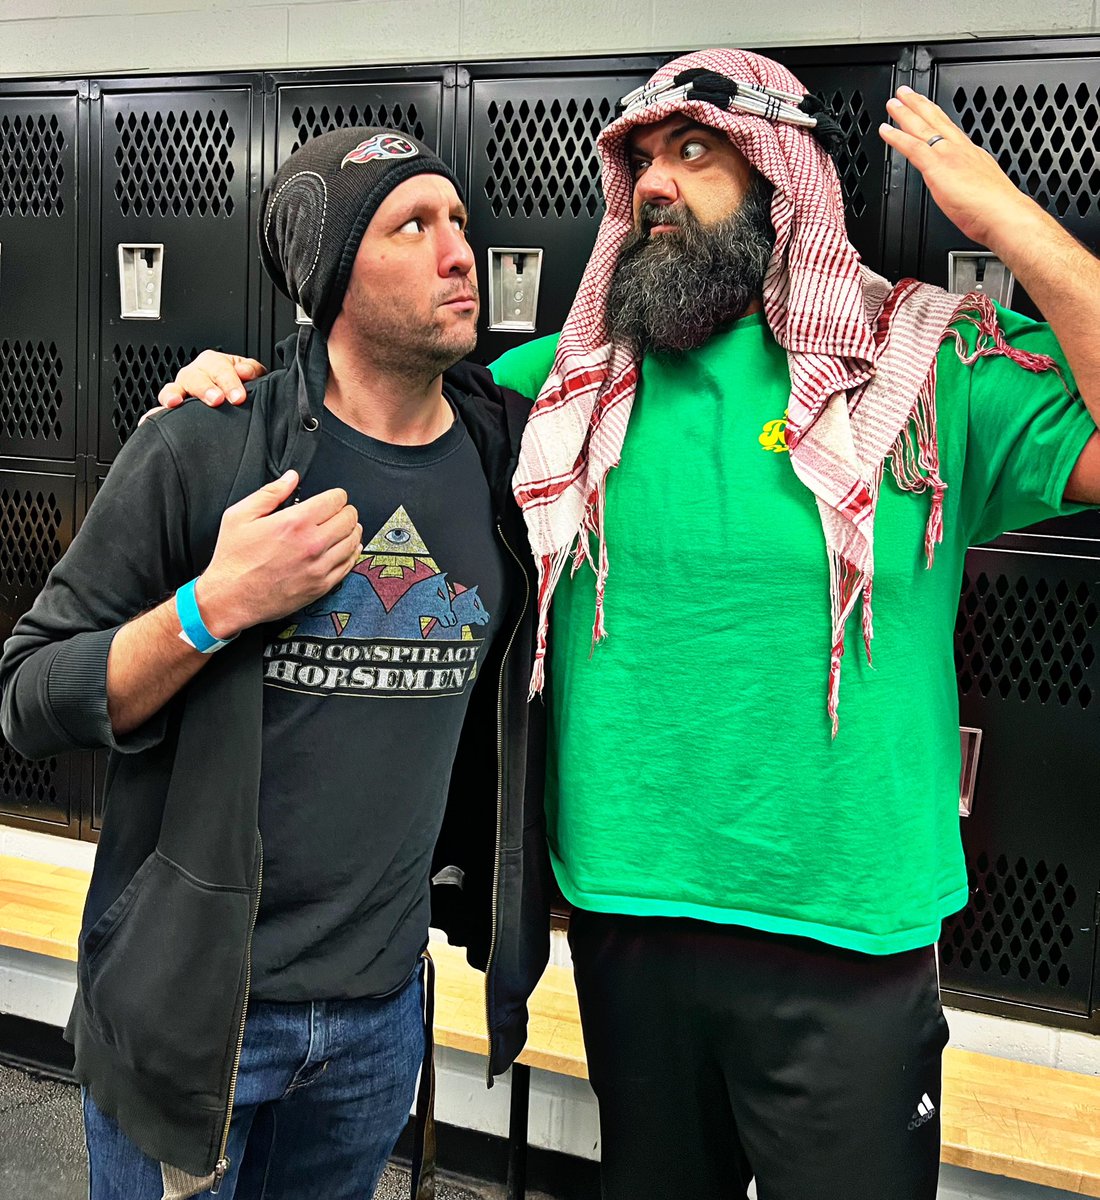 Hanging with the boss man @Bin_Hamin after his match! Catch us on #LightTheFuse every week on channelattitude.com @ChannelAttitude @HaminMediaGroup @THEVinceRusso